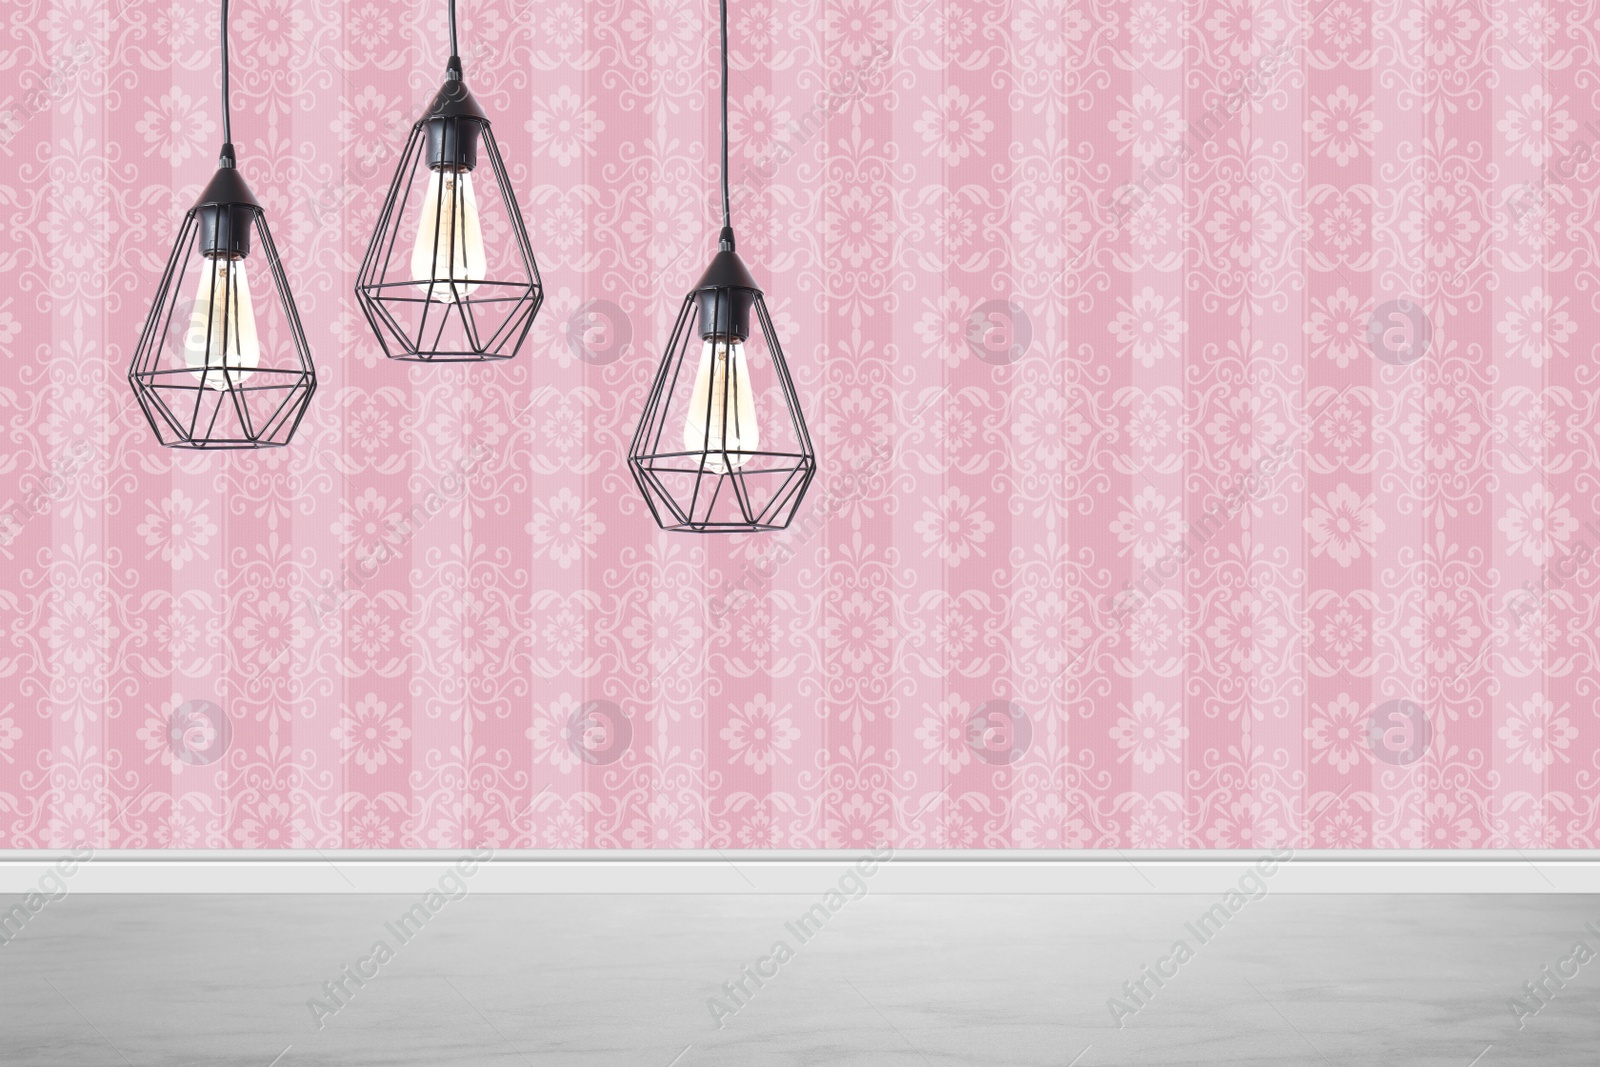 Image of Stylish pendant lamps hanging near pink wall in room